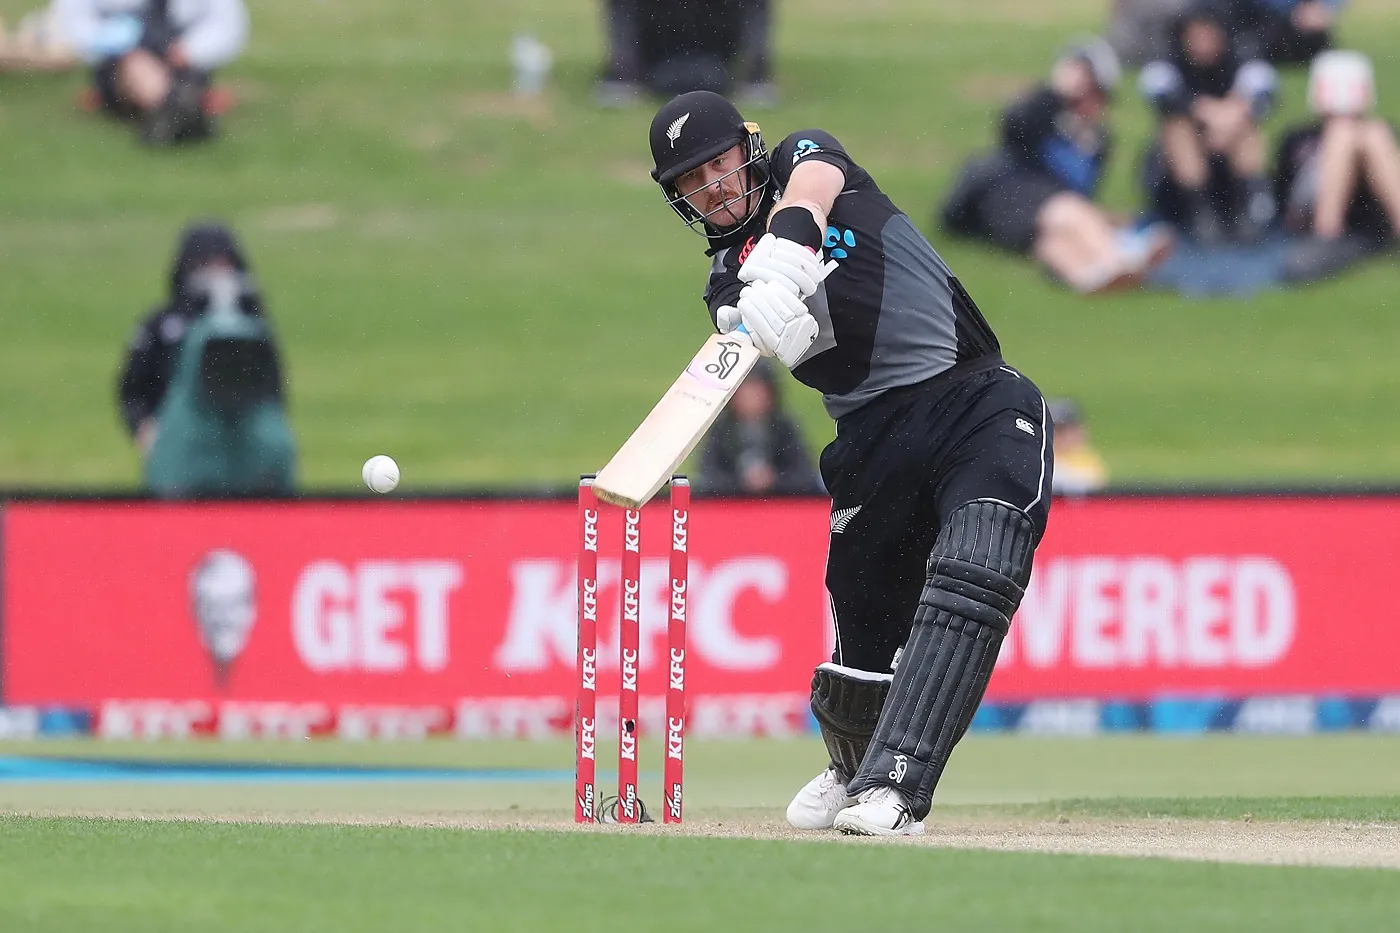 Guptill is not retired, still motivated to play and get better, says New Zealand captain Kane Williamson